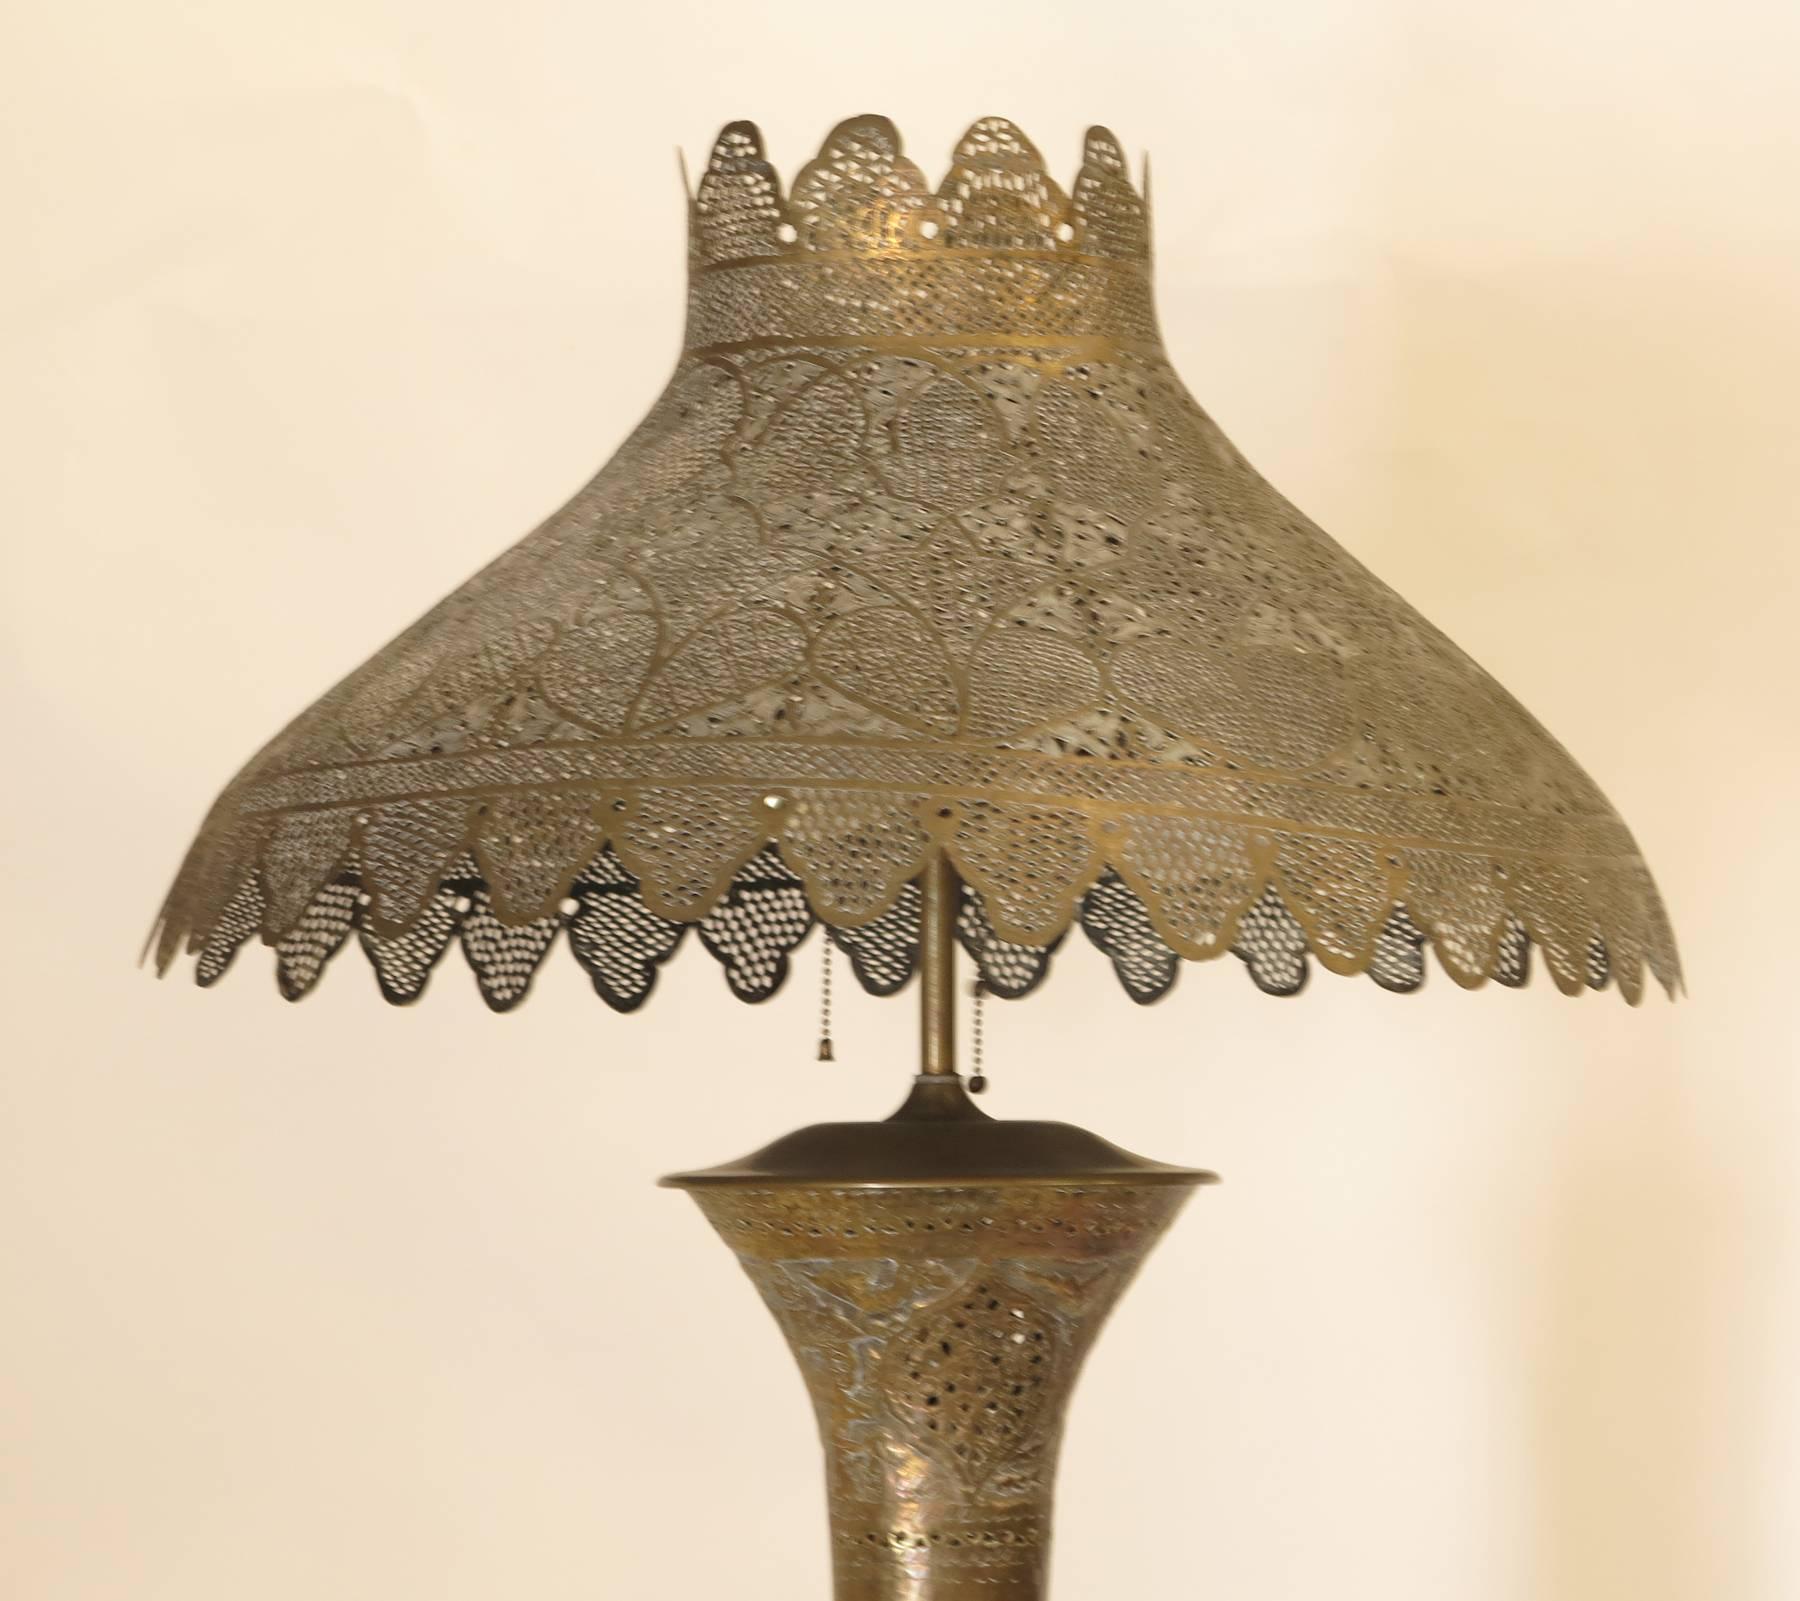 Moroccan style pierced brass Moorish floor lamp. Decorated with figures and Hebrew writings. Judaica. Nice old patina finish on this Syrian lamp 